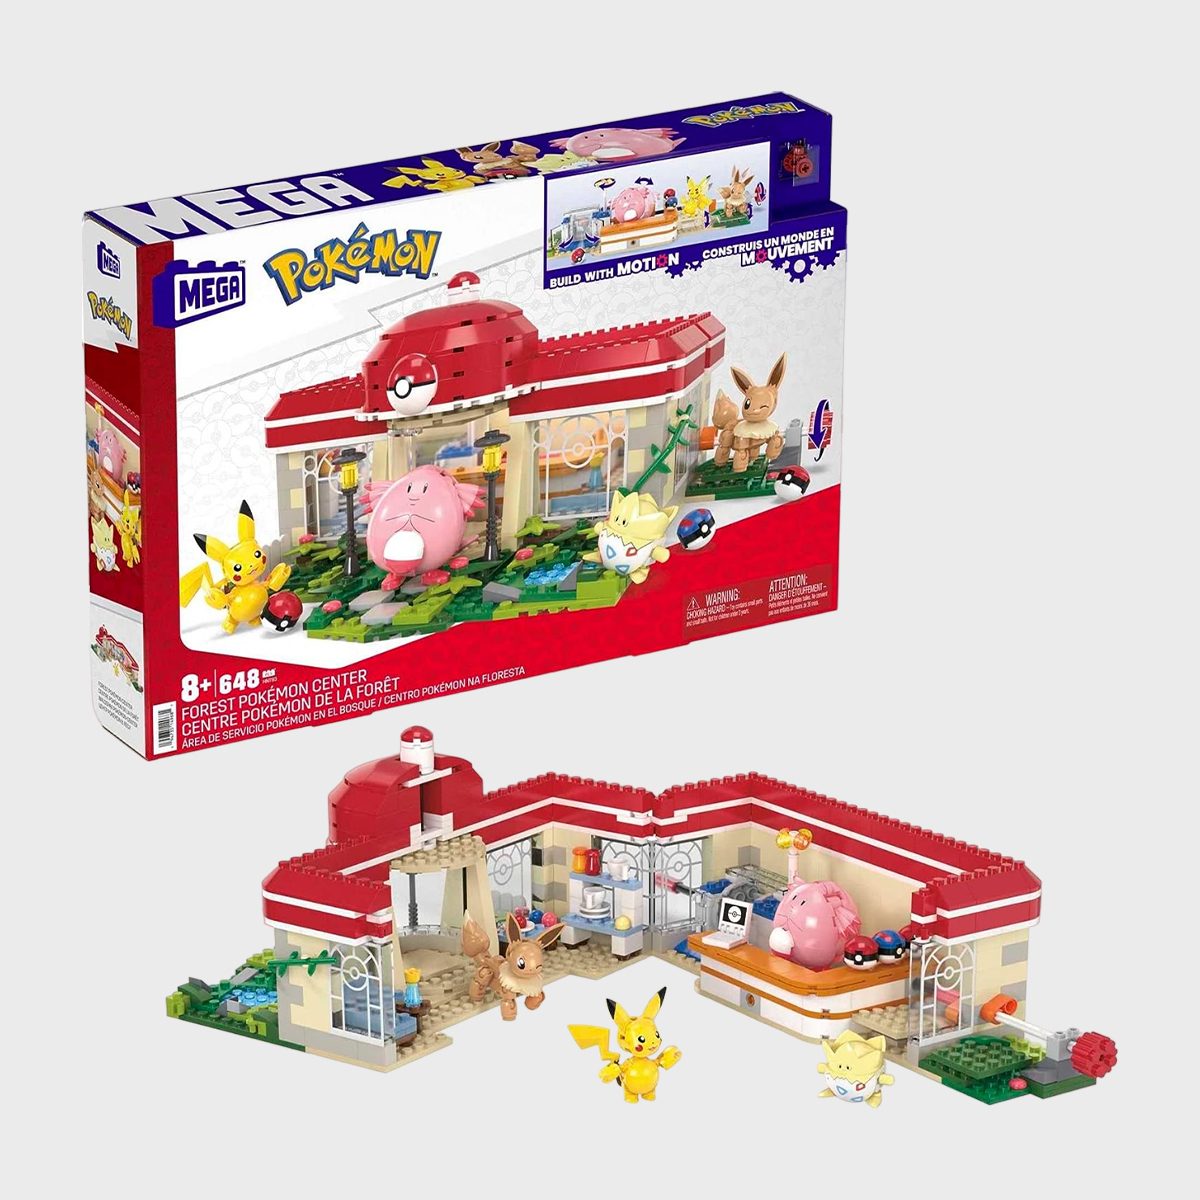 <p>Pokémon fans can build a 648-piece <a href="https://www.amazon.com/Pokemon-Action-Building-Poseable-Characters/dp/B0BBSWMDJD" rel="noopener noreferrer">Pokémon Center</a>, complete with Motion Brick for built-in movement and four of their favorite characters. They can see Chansey dancing, Pikachu and Eevee playing peek-a-boo and Togepi opening the door with the turn of a crank.</p> <p>Once they've mastered this set, they can combine it with other Adventure Builder sets to create the ultimate Pokémon world. While they're busy building, you can keep them laughing with these <a href="https://www.rd.com/list/hilarious-pokemon-puns/" rel="noopener noreferrer">hilarious Pokémon puns</a>.</p> <p class="listicle-page__cta-button-shop"><a class="shop-btn" href="https://www.amazon.com/Pokemon-Action-Building-Poseable-Characters/dp/B0BBSWMDJD">Shop Now</a></p>